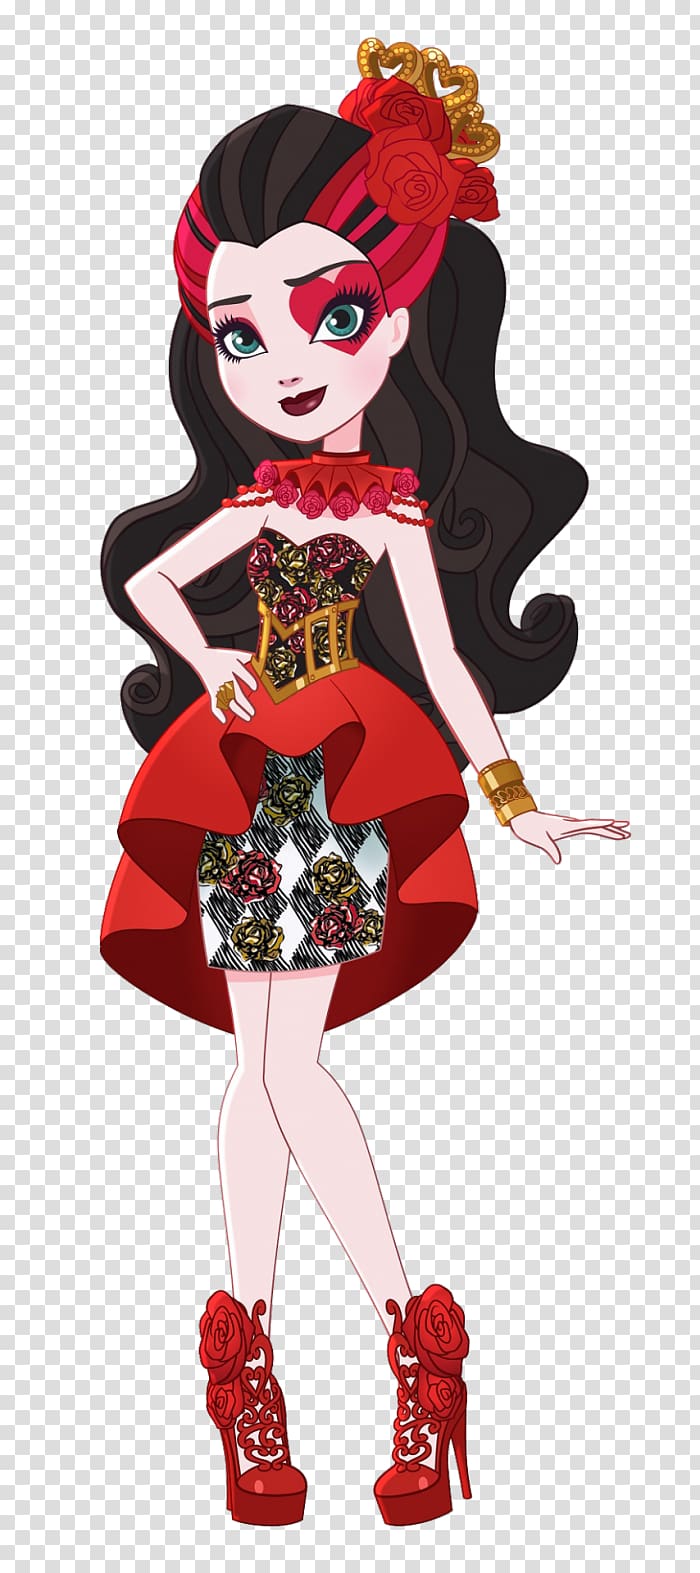 Queen of Hearts Ever After High Doll Alice\'s Adventures in Wonderland Monster High, queen transparent background PNG clipart